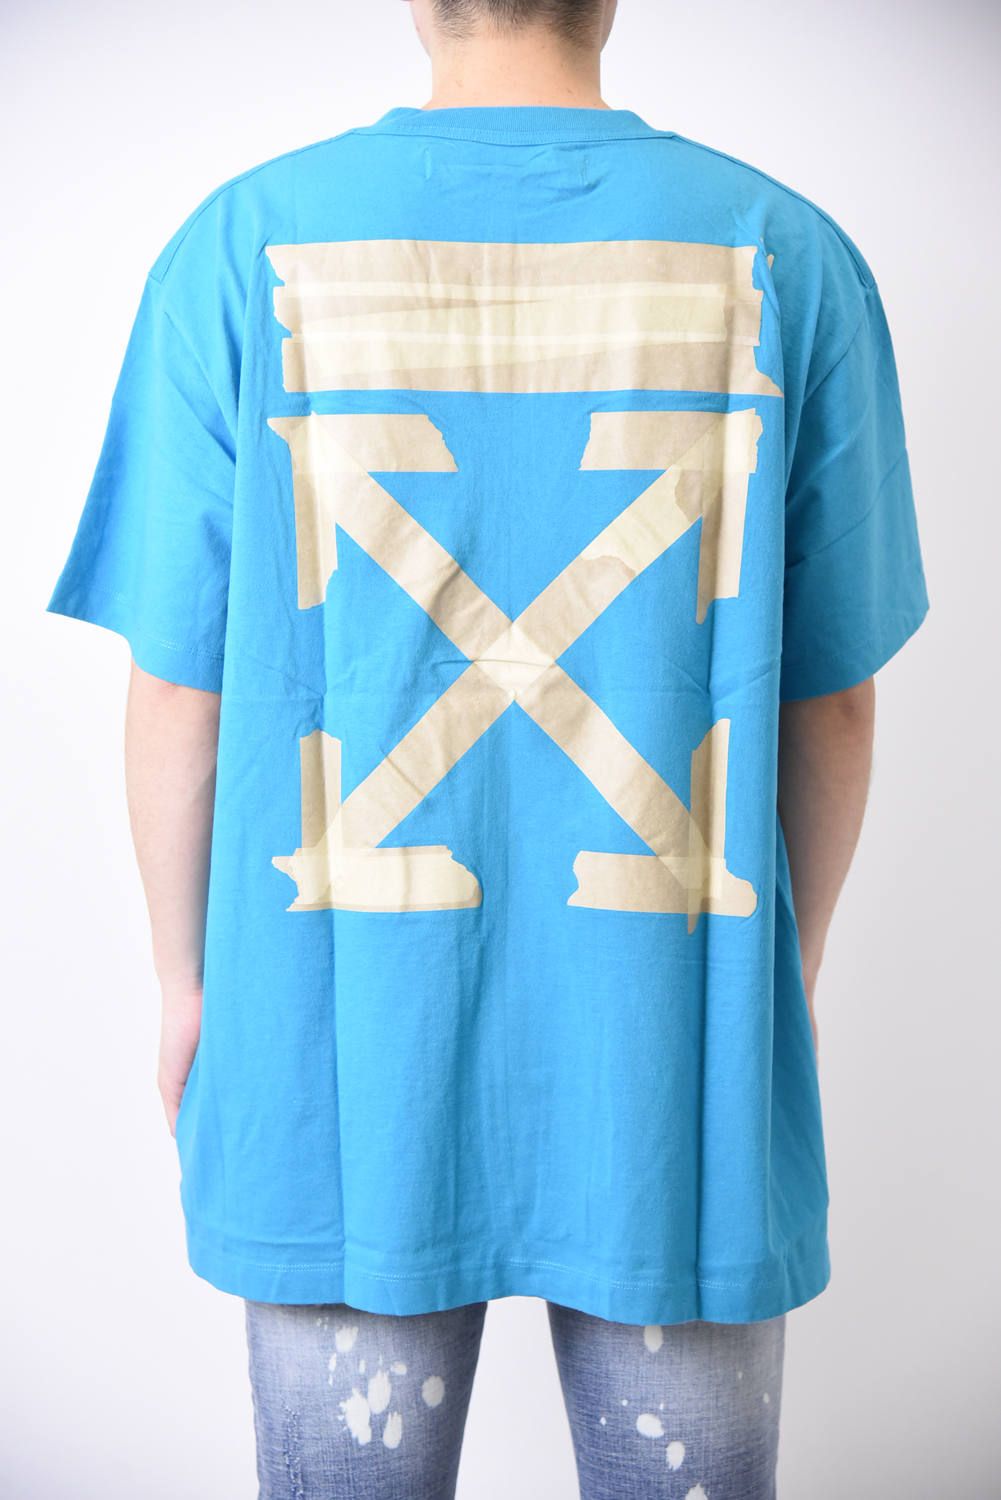 OFF-WHITE - TAPE ARROWS SS T-SHIRT / テープアロー プリント 半袖T 